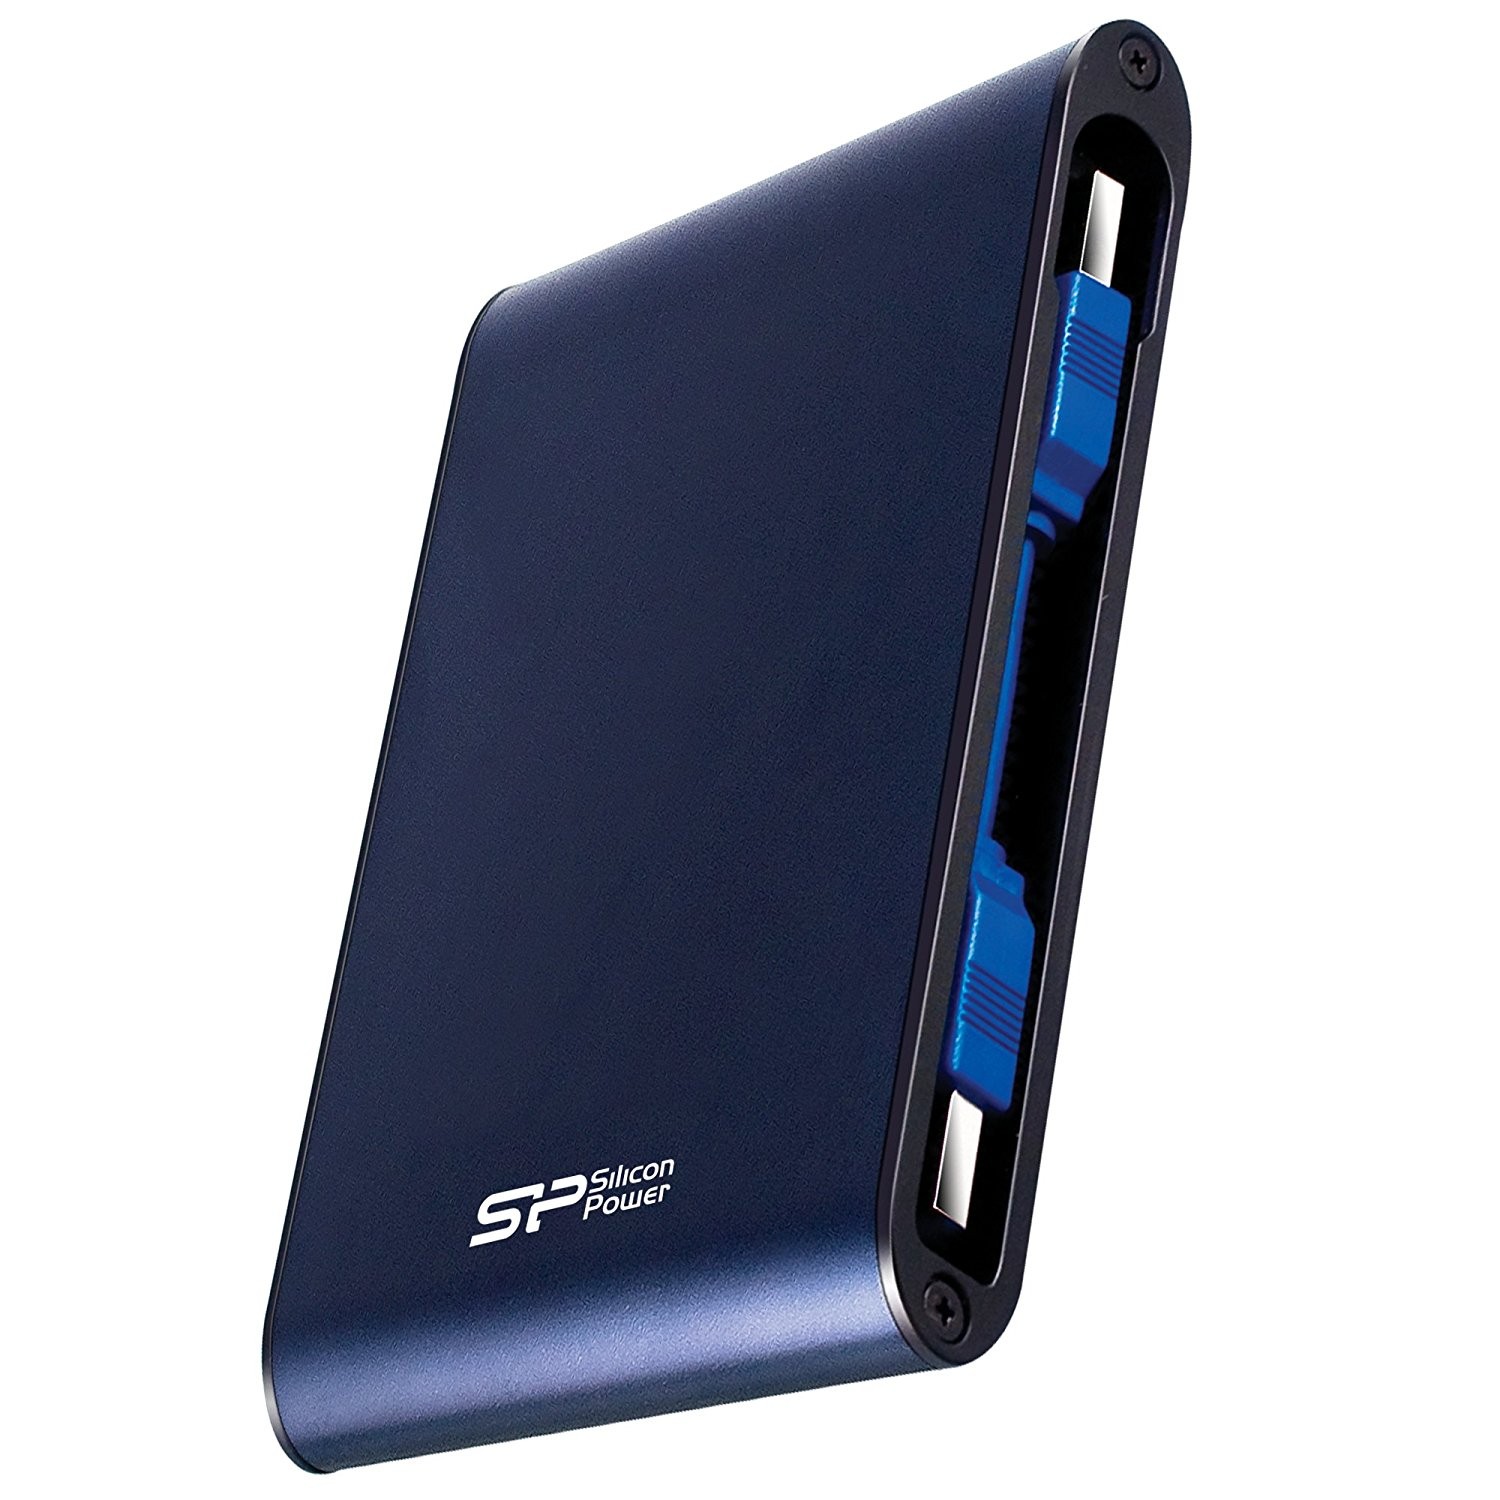 Silicon Power 1TB A80 Rugged Shock, Water, Pressureproof Portable External Hard Drive USB 3.0 For PC,MAC,XBOX,PS4